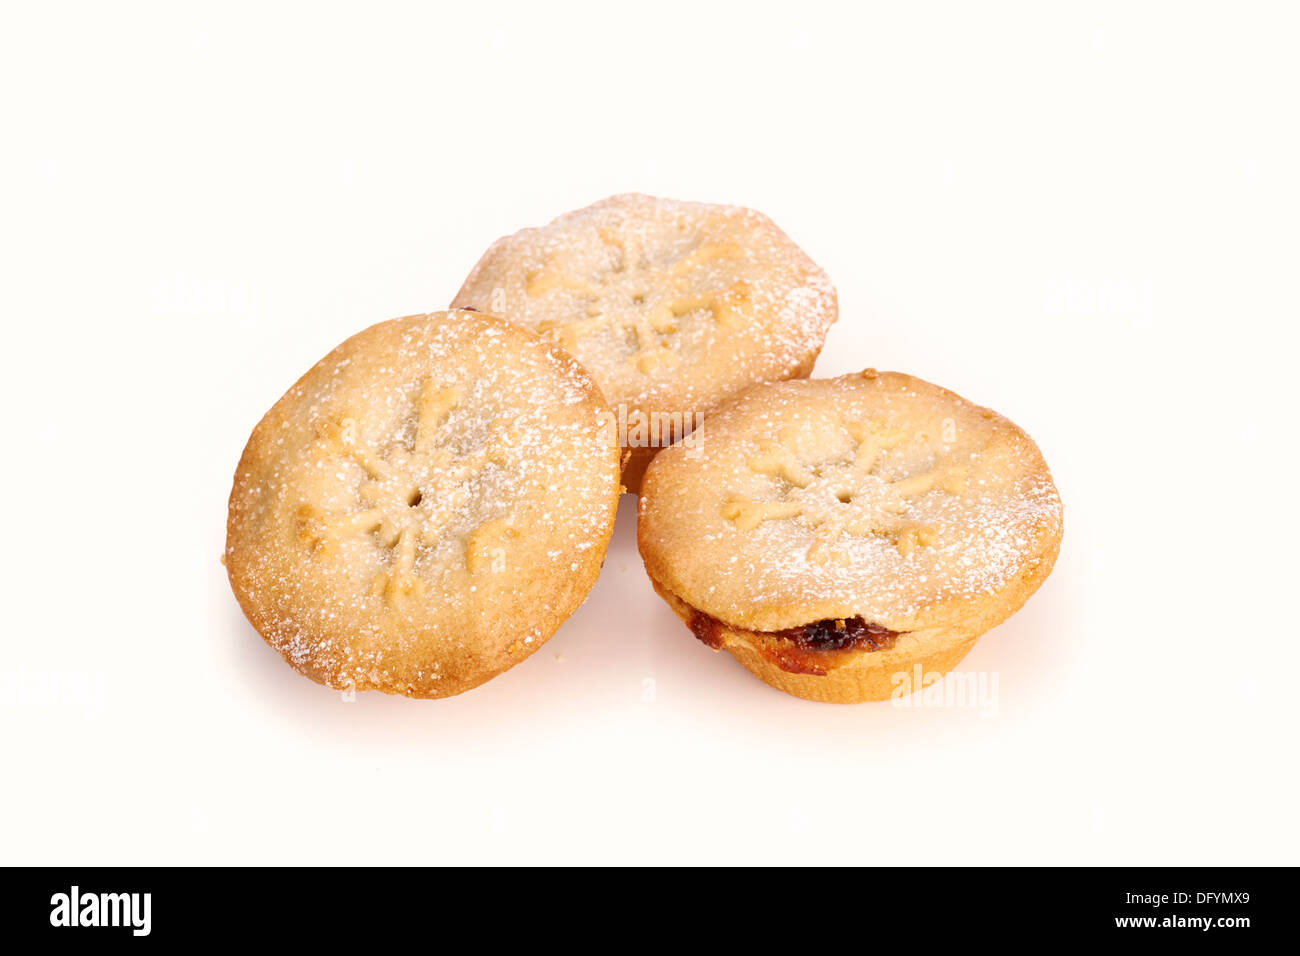 Sweet Christmas mince pies on a white background. Stock Photo